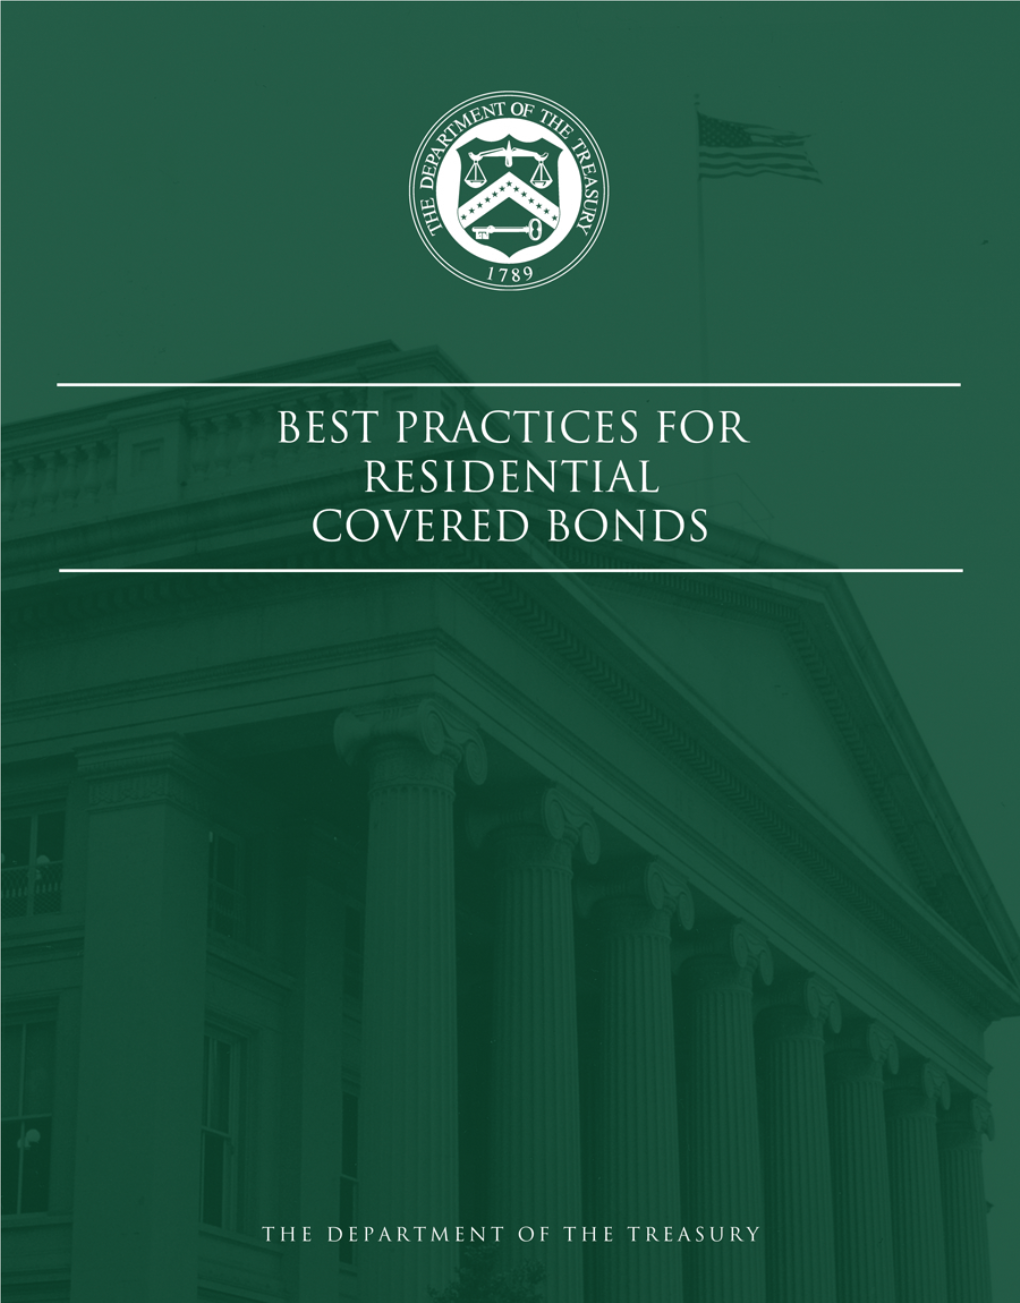 Best Practices for Residential Covered Bonds